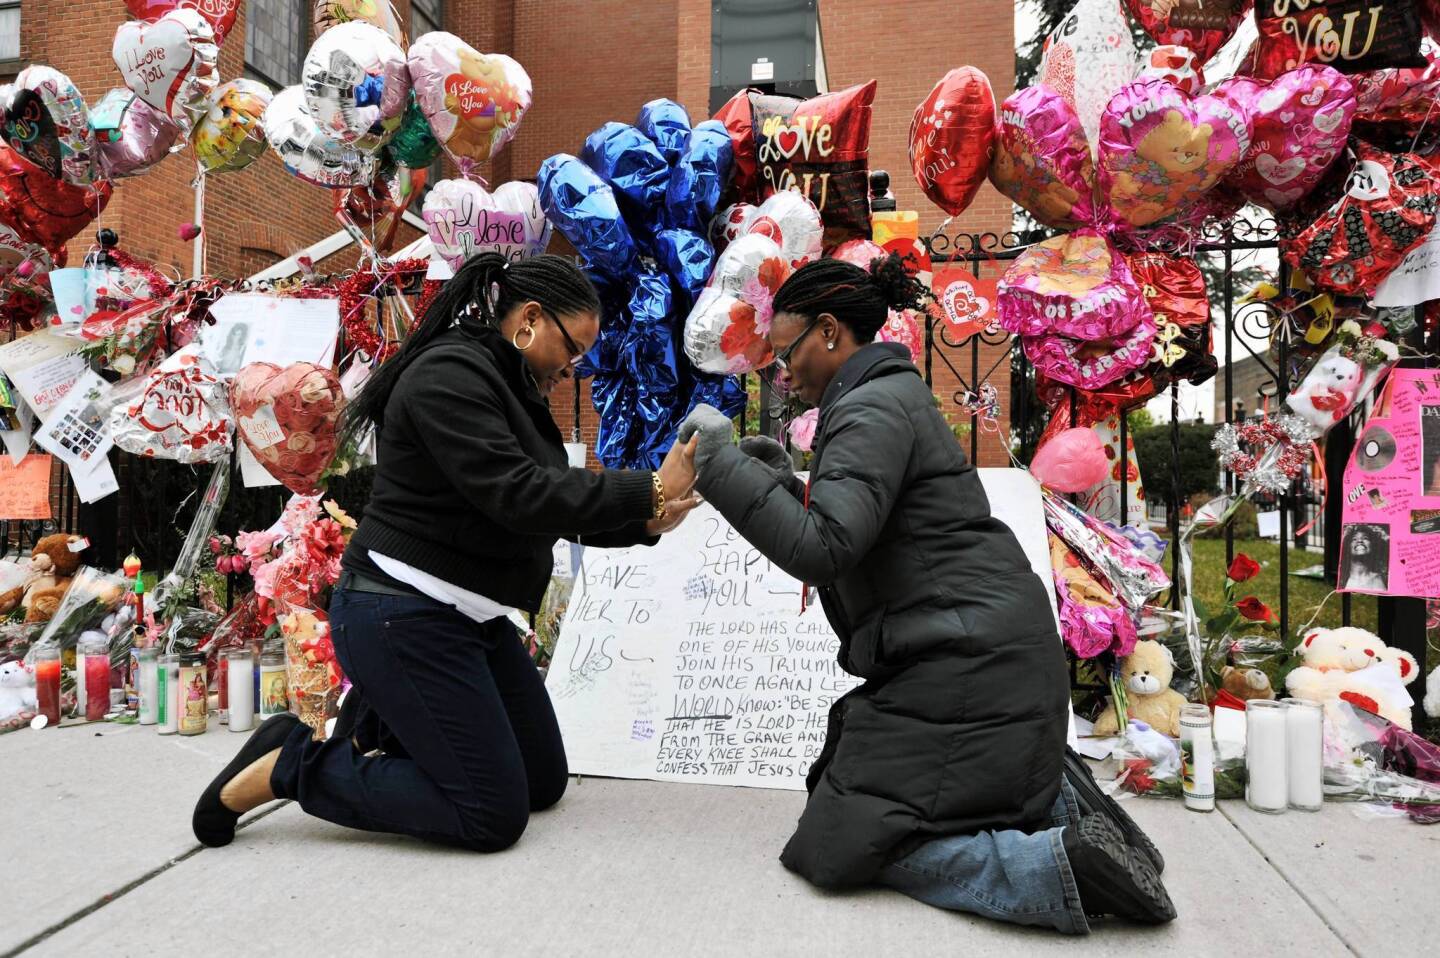 Amanda Kweku, left, and Latisha Watkins, right, pray in front of a display of messages for singer Whitney Houston at the New Hope Baptist Church in Newark, New Jersey.